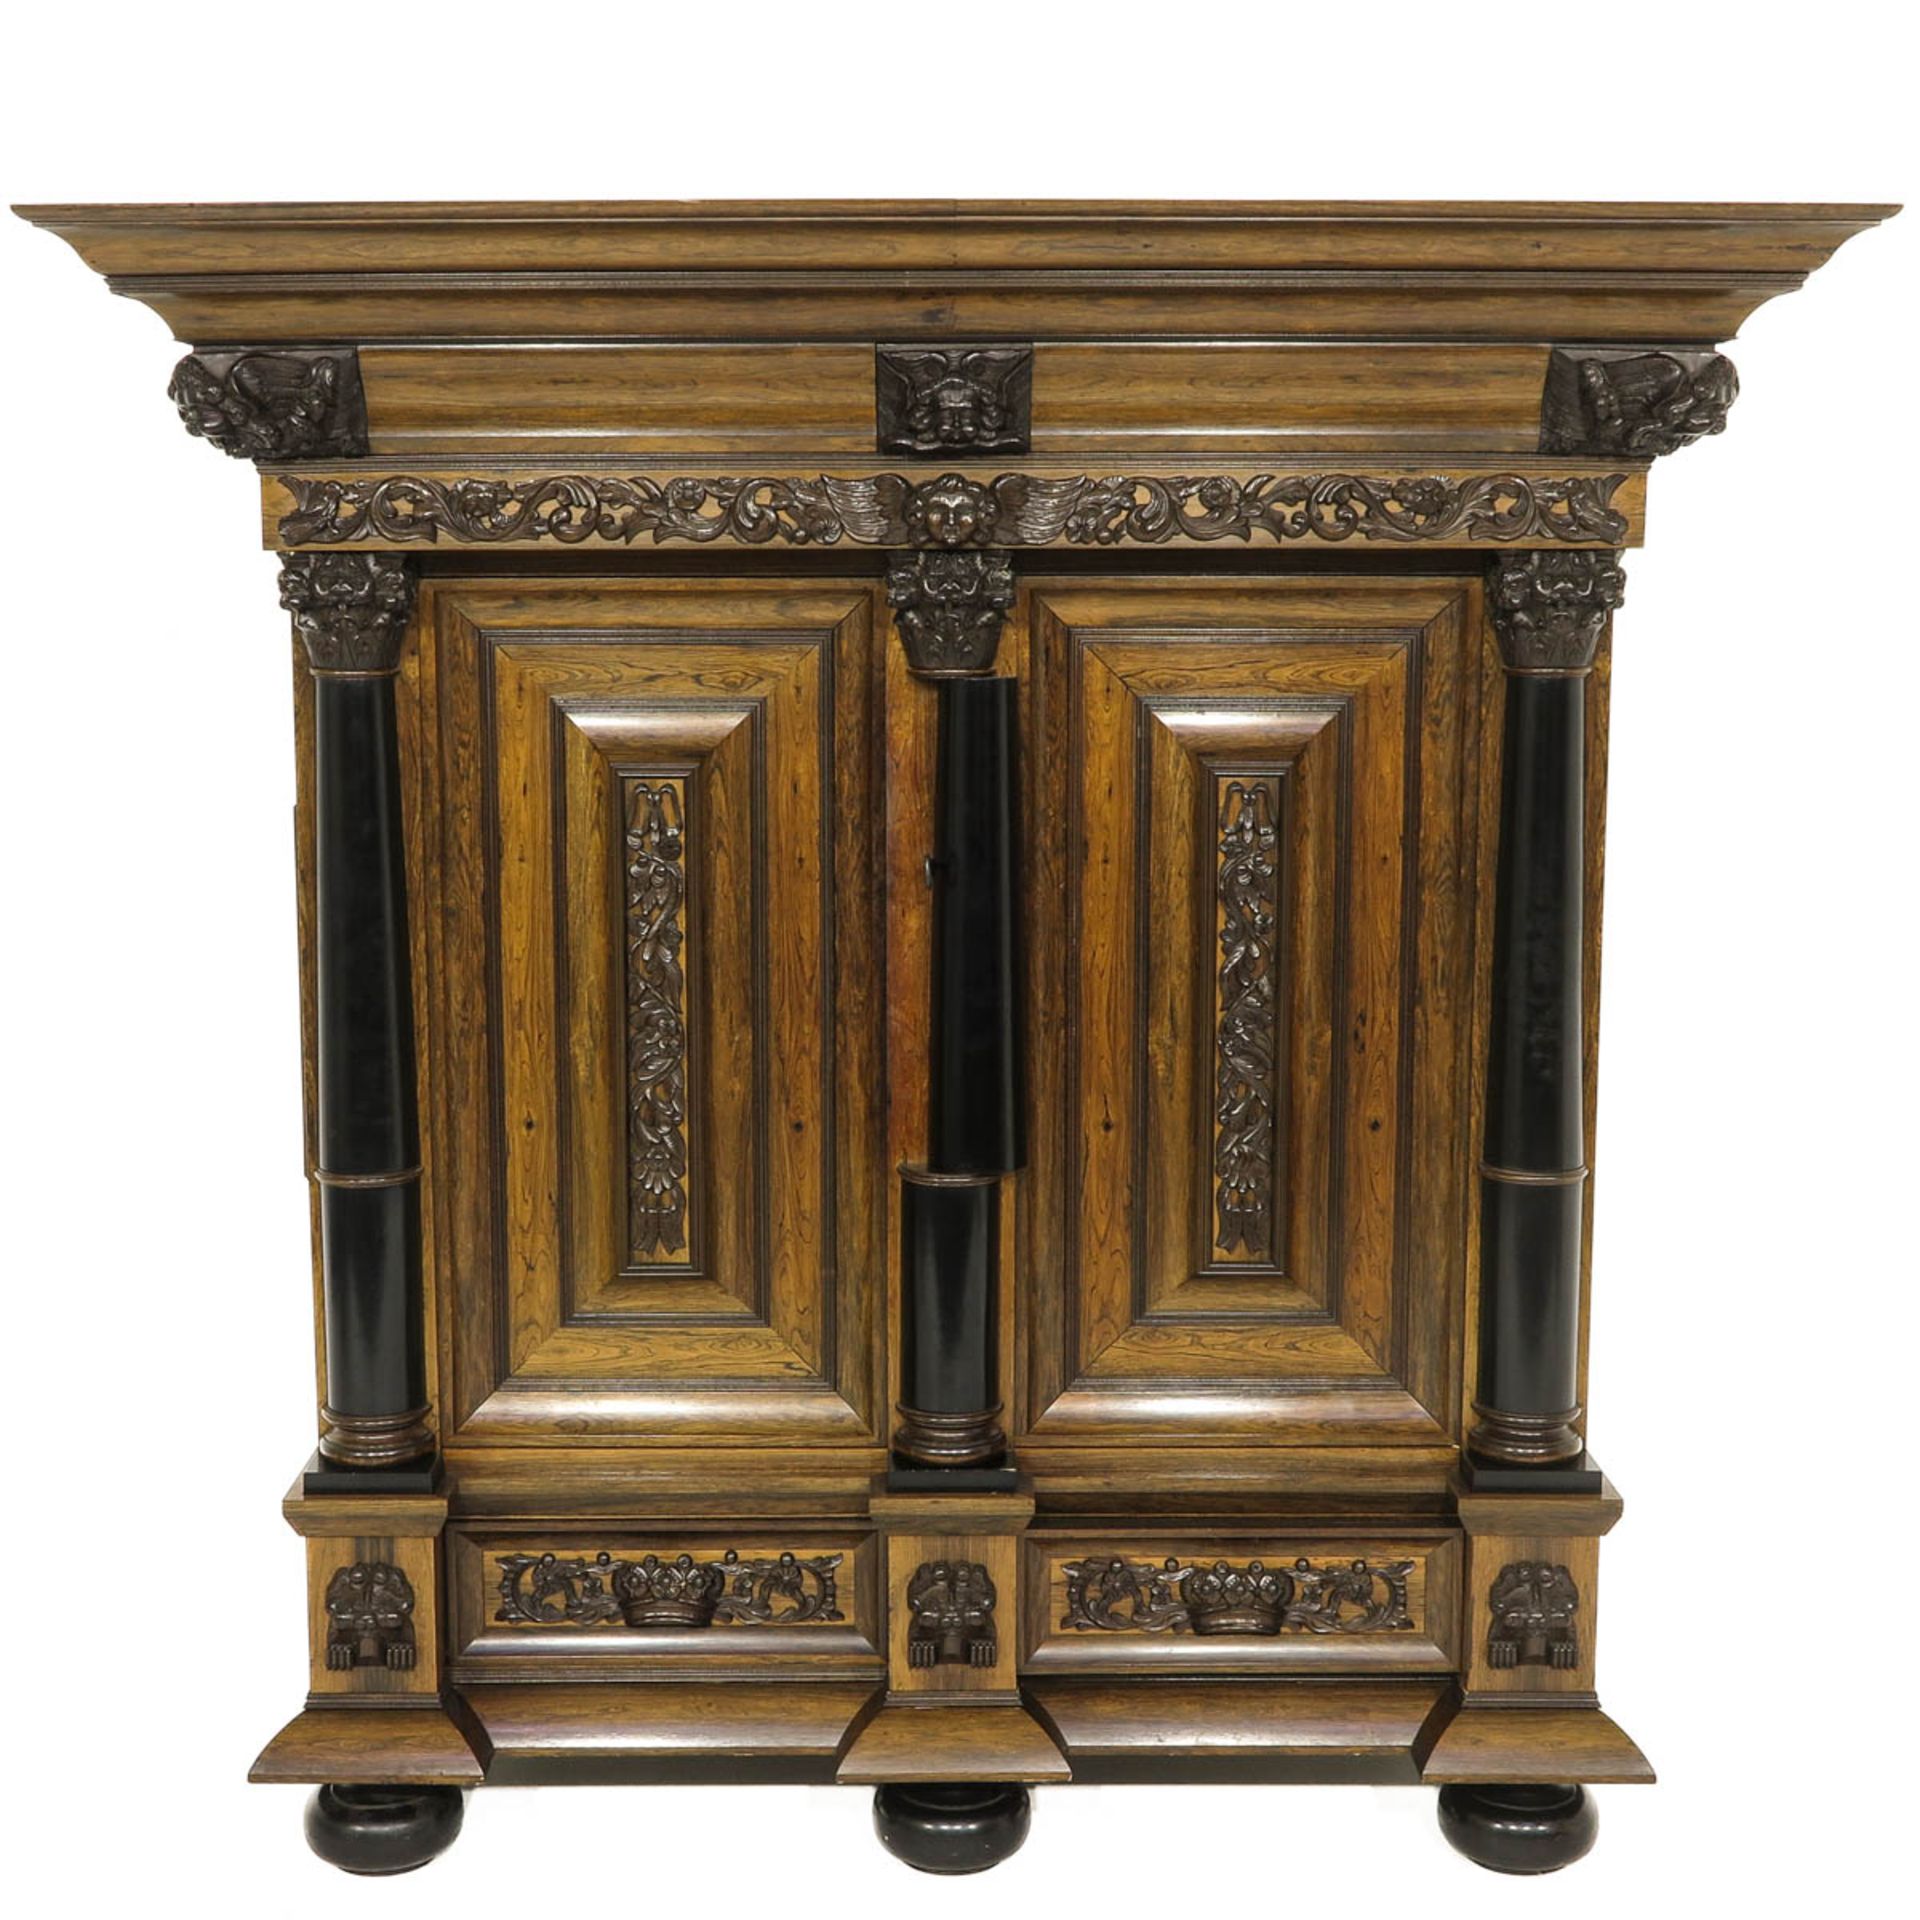 A Very Beautifully Carved Cabinet or Kussenkast